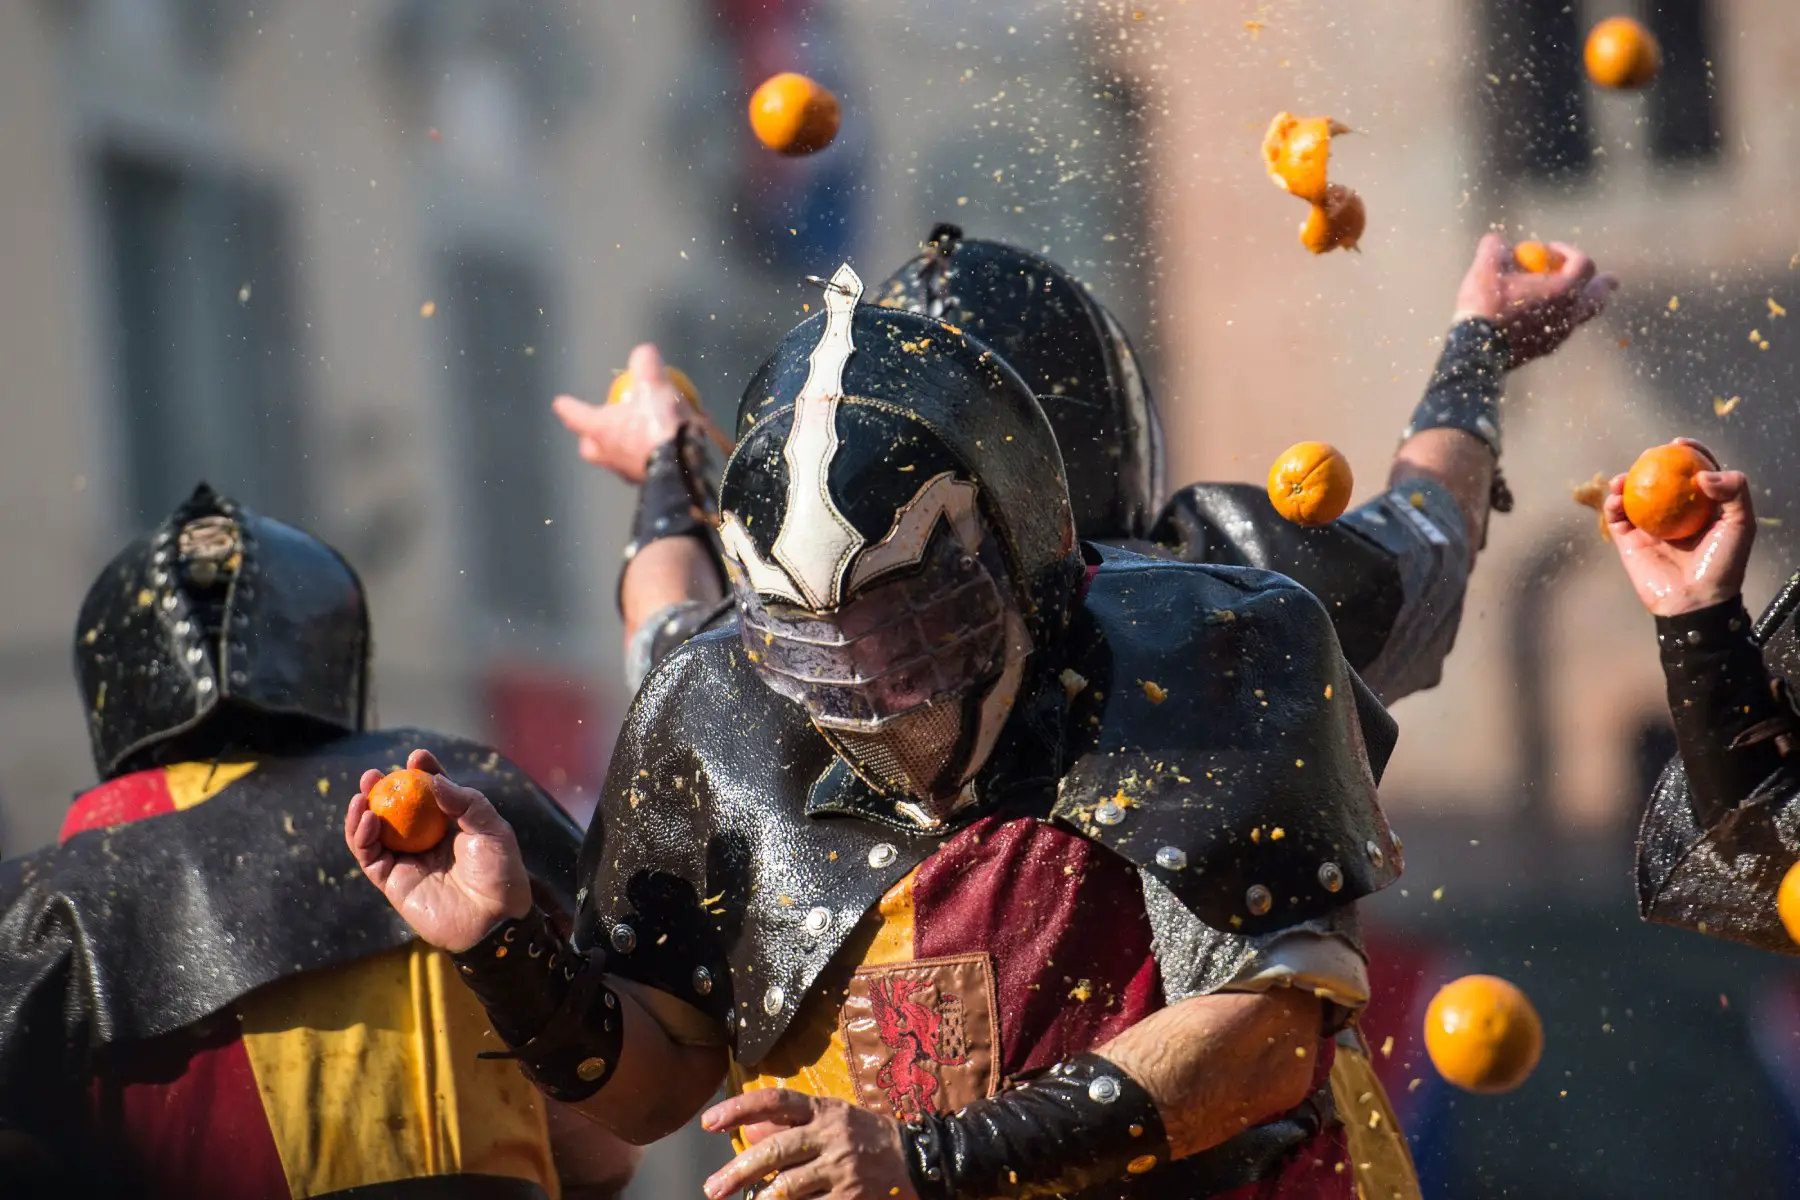 Crowd throwing oranges during the battle of oranges at the Storico Carnevale di Ivrea